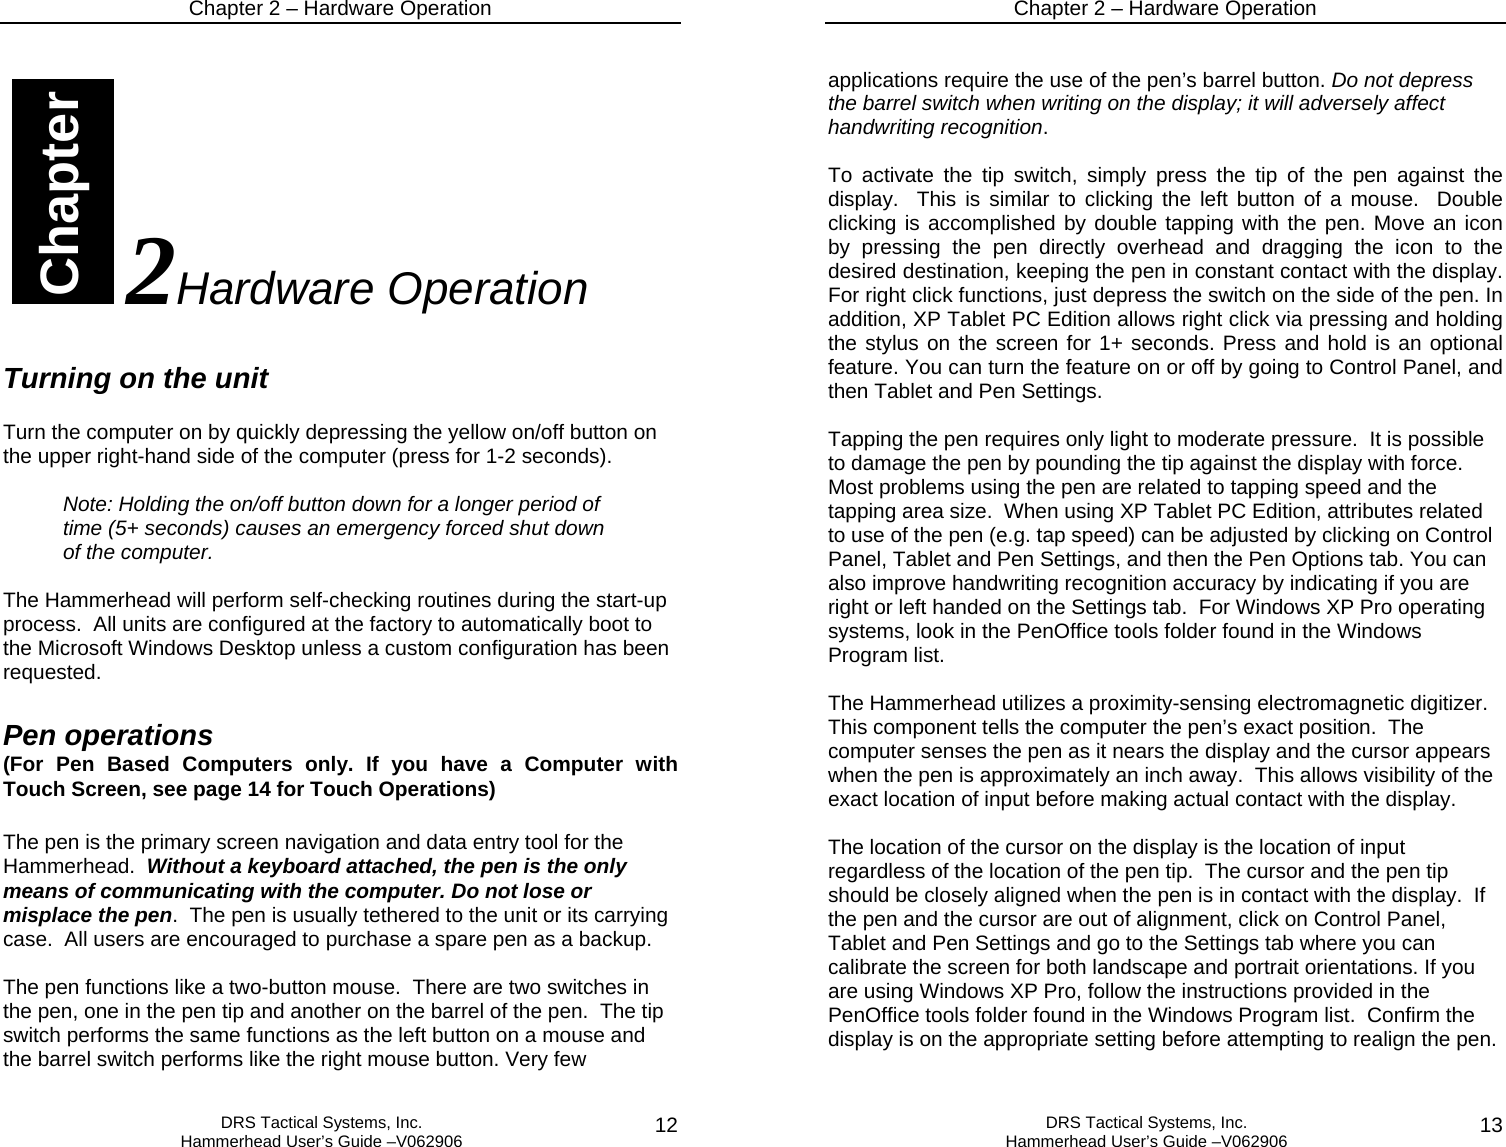 Chapter 2 – Hardware Operation   DRS Tactical Systems, Inc.  Hammerhead User’s Guide –V062906  12                                 2Hardware Operation  Turning on the unit  Turn the computer on by quickly depressing the yellow on/off button on the upper right-hand side of the computer (press for 1-2 seconds).    Note: Holding the on/off button down for a longer period of time (5+ seconds) causes an emergency forced shut down of the computer.  The Hammerhead will perform self-checking routines during the start-up process.  All units are configured at the factory to automatically boot to the Microsoft Windows Desktop unless a custom configuration has been requested.    Pen operations (For Pen Based Computers only. If you have a Computer with Touch Screen, see page 14 for Touch Operations)  The pen is the primary screen navigation and data entry tool for the Hammerhead.  Without a keyboard attached, the pen is the only means of communicating with the computer. Do not lose or misplace the pen.  The pen is usually tethered to the unit or its carrying case.  All users are encouraged to purchase a spare pen as a backup.    The pen functions like a two-button mouse.  There are two switches in the pen, one in the pen tip and another on the barrel of the pen.  The tip switch performs the same functions as the left button on a mouse and the barrel switch performs like the right mouse button. Very few Chapter Chapter 2 – Hardware Operation   DRS Tactical Systems, Inc.  Hammerhead User’s Guide –V062906  13 applications require the use of the pen’s barrel button. Do not depress the barrel switch when writing on the display; it will adversely affect handwriting recognition.   To activate the tip switch, simply press the tip of the pen against the display.  This is similar to clicking the left button of a mouse.  Double clicking is accomplished by double tapping with the pen. Move an icon by pressing the pen directly overhead and dragging the icon to the desired destination, keeping the pen in constant contact with the display.  For right click functions, just depress the switch on the side of the pen. In addition, XP Tablet PC Edition allows right click via pressing and holding the stylus on the screen for 1+ seconds. Press and hold is an optional feature. You can turn the feature on or off by going to Control Panel, and then Tablet and Pen Settings.  Tapping the pen requires only light to moderate pressure.  It is possible to damage the pen by pounding the tip against the display with force.  Most problems using the pen are related to tapping speed and the tapping area size.  When using XP Tablet PC Edition, attributes related to use of the pen (e.g. tap speed) can be adjusted by clicking on Control Panel, Tablet and Pen Settings, and then the Pen Options tab. You can also improve handwriting recognition accuracy by indicating if you are right or left handed on the Settings tab.  For Windows XP Pro operating systems, look in the PenOffice tools folder found in the Windows Program list.  The Hammerhead utilizes a proximity-sensing electromagnetic digitizer.  This component tells the computer the pen’s exact position.  The computer senses the pen as it nears the display and the cursor appears when the pen is approximately an inch away.  This allows visibility of the exact location of input before making actual contact with the display.    The location of the cursor on the display is the location of input regardless of the location of the pen tip.  The cursor and the pen tip should be closely aligned when the pen is in contact with the display.  If the pen and the cursor are out of alignment, click on Control Panel, Tablet and Pen Settings and go to the Settings tab where you can calibrate the screen for both landscape and portrait orientations. If you are using Windows XP Pro, follow the instructions provided in the PenOffice tools folder found in the Windows Program list.  Confirm the display is on the appropriate setting before attempting to realign the pen.  